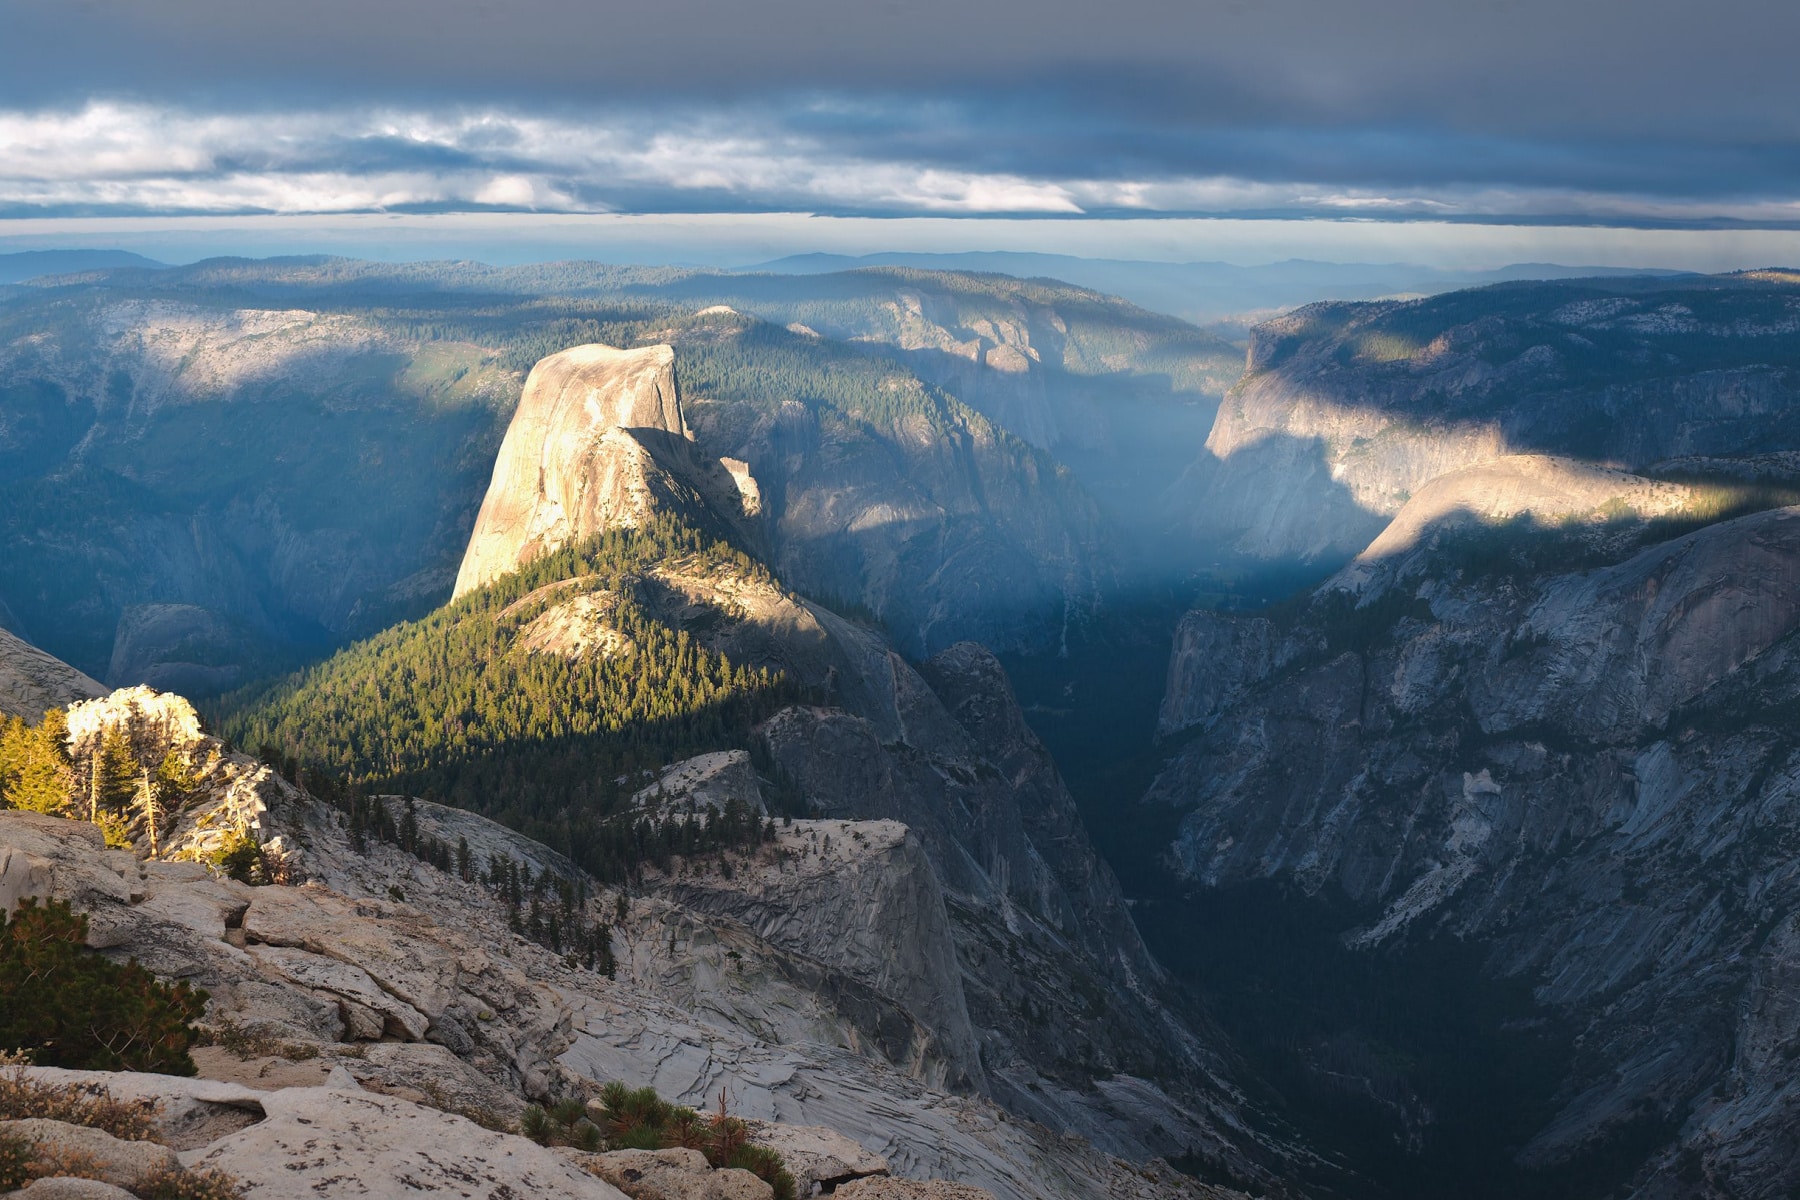 Half Dome as seen from the Clouds Rest Trail in Yosemite.